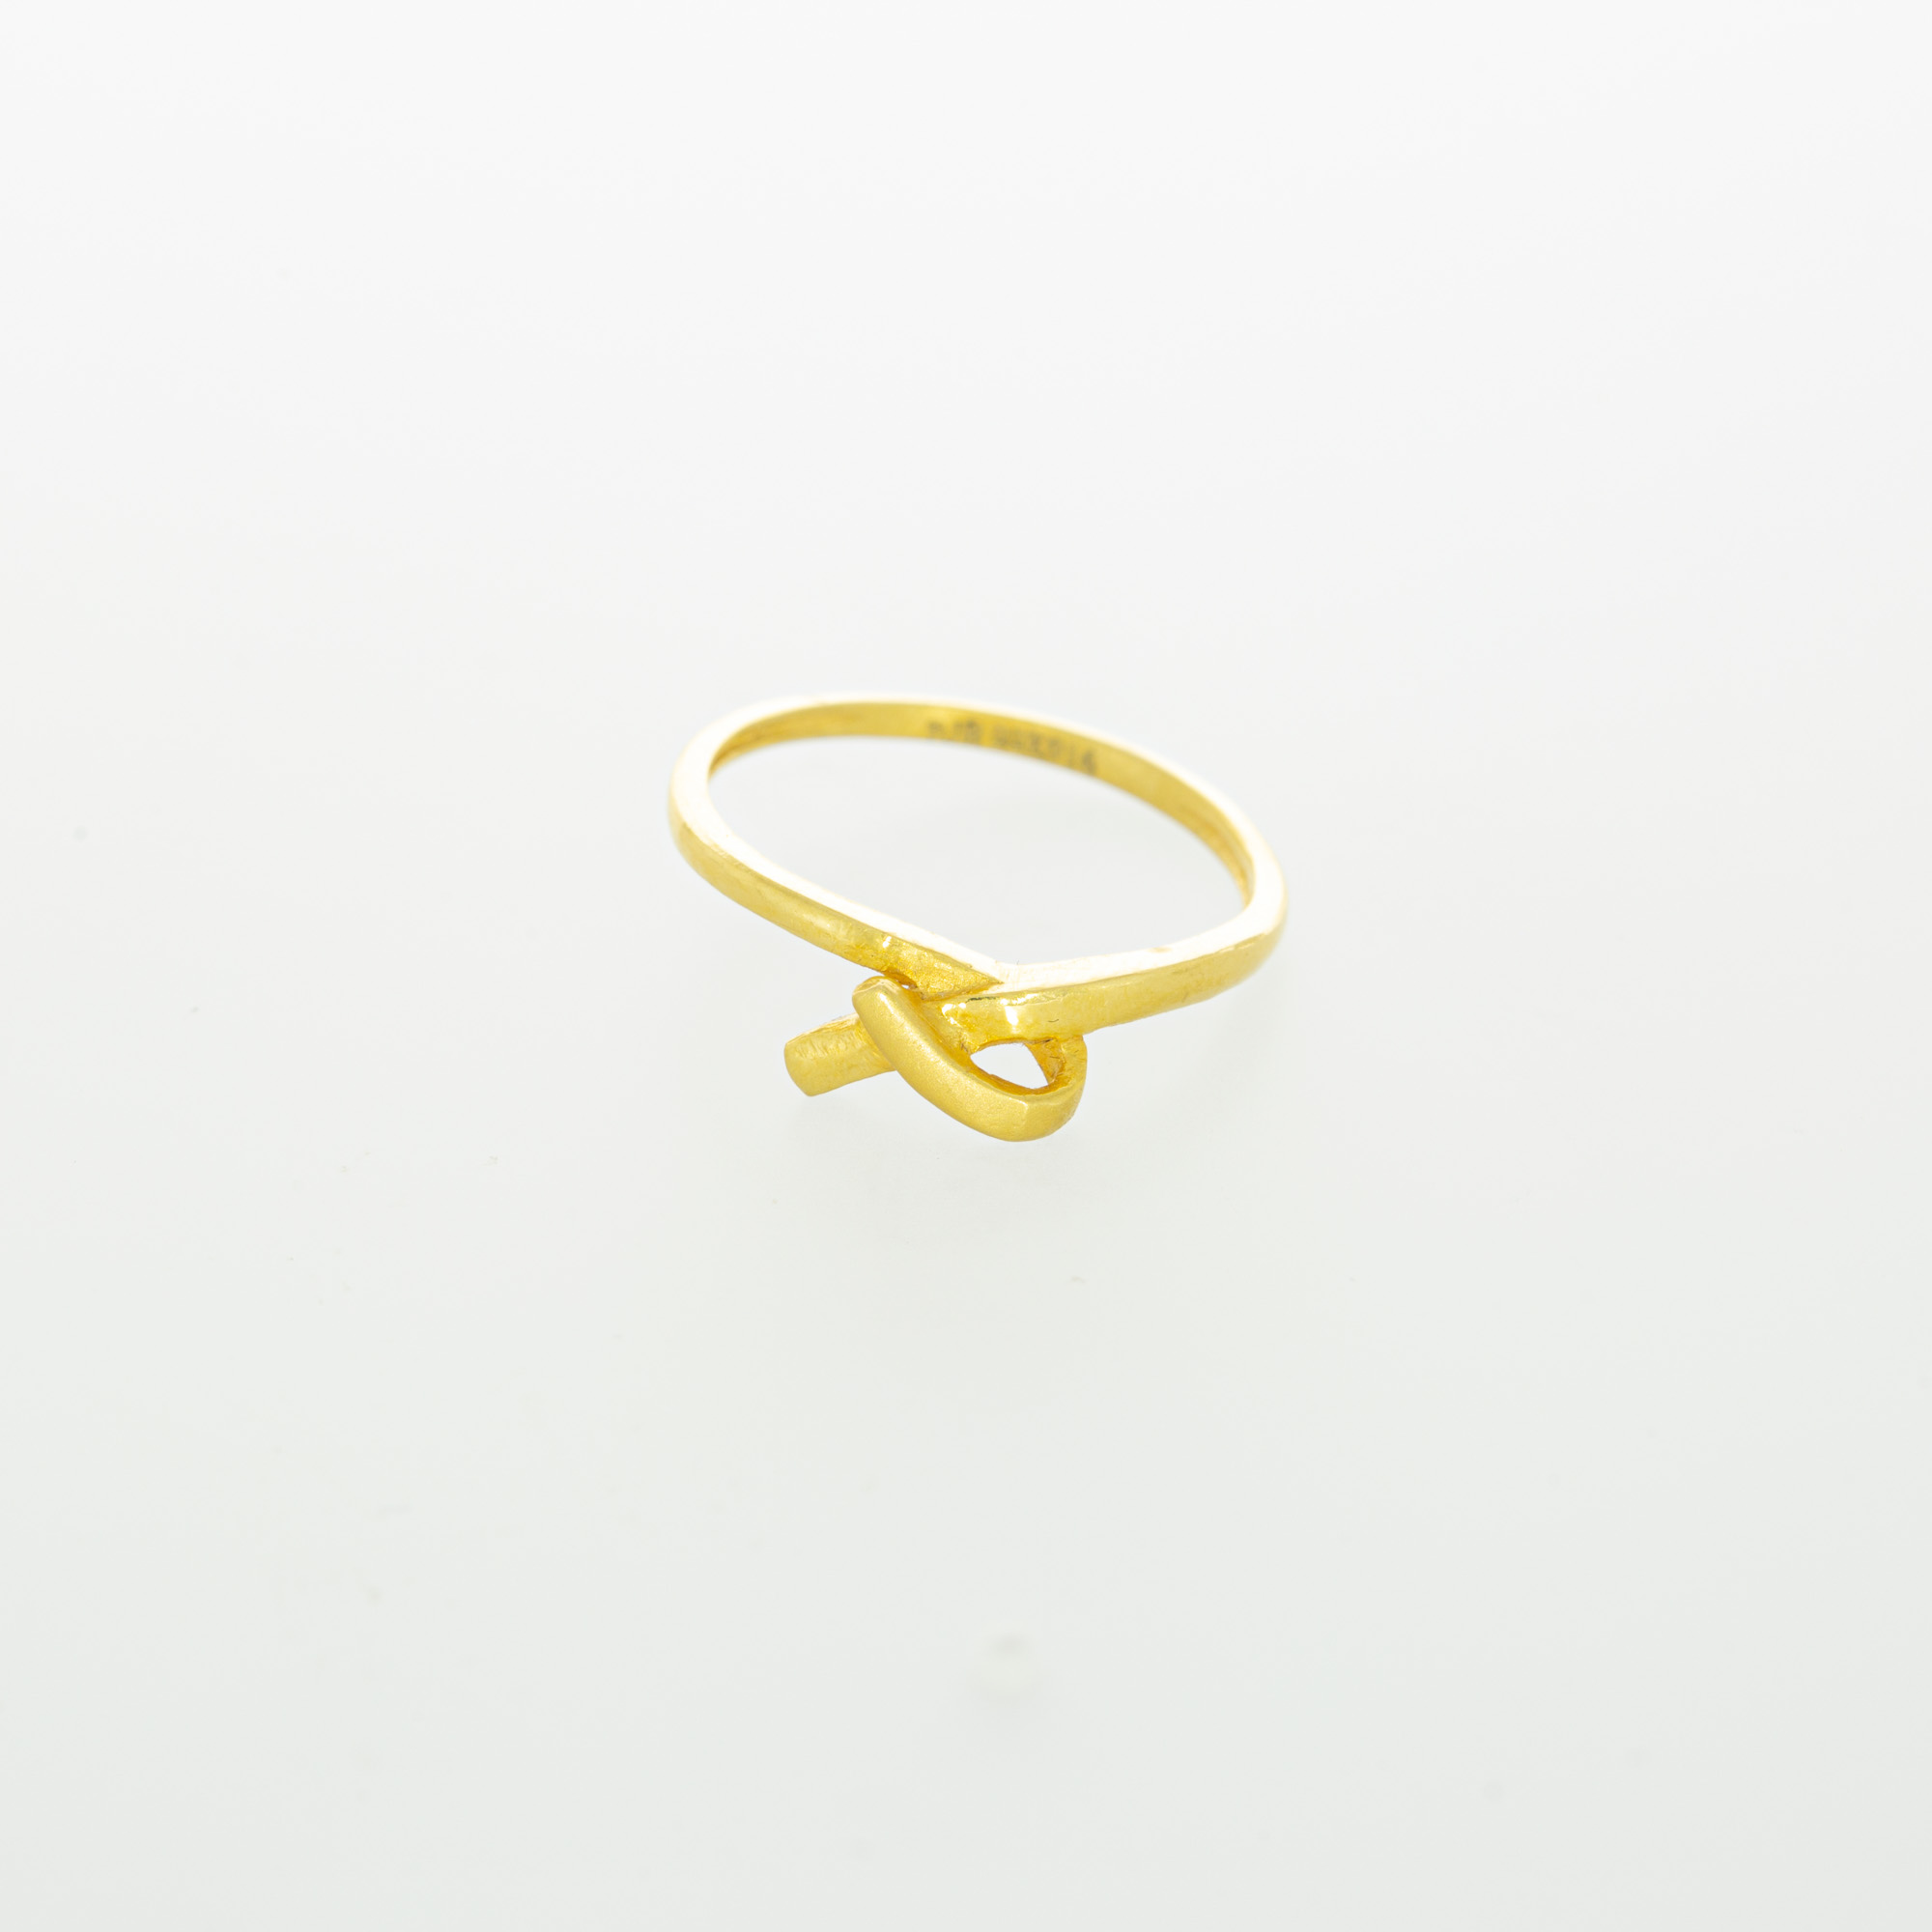 Glorious Casting 22k Gold Ring